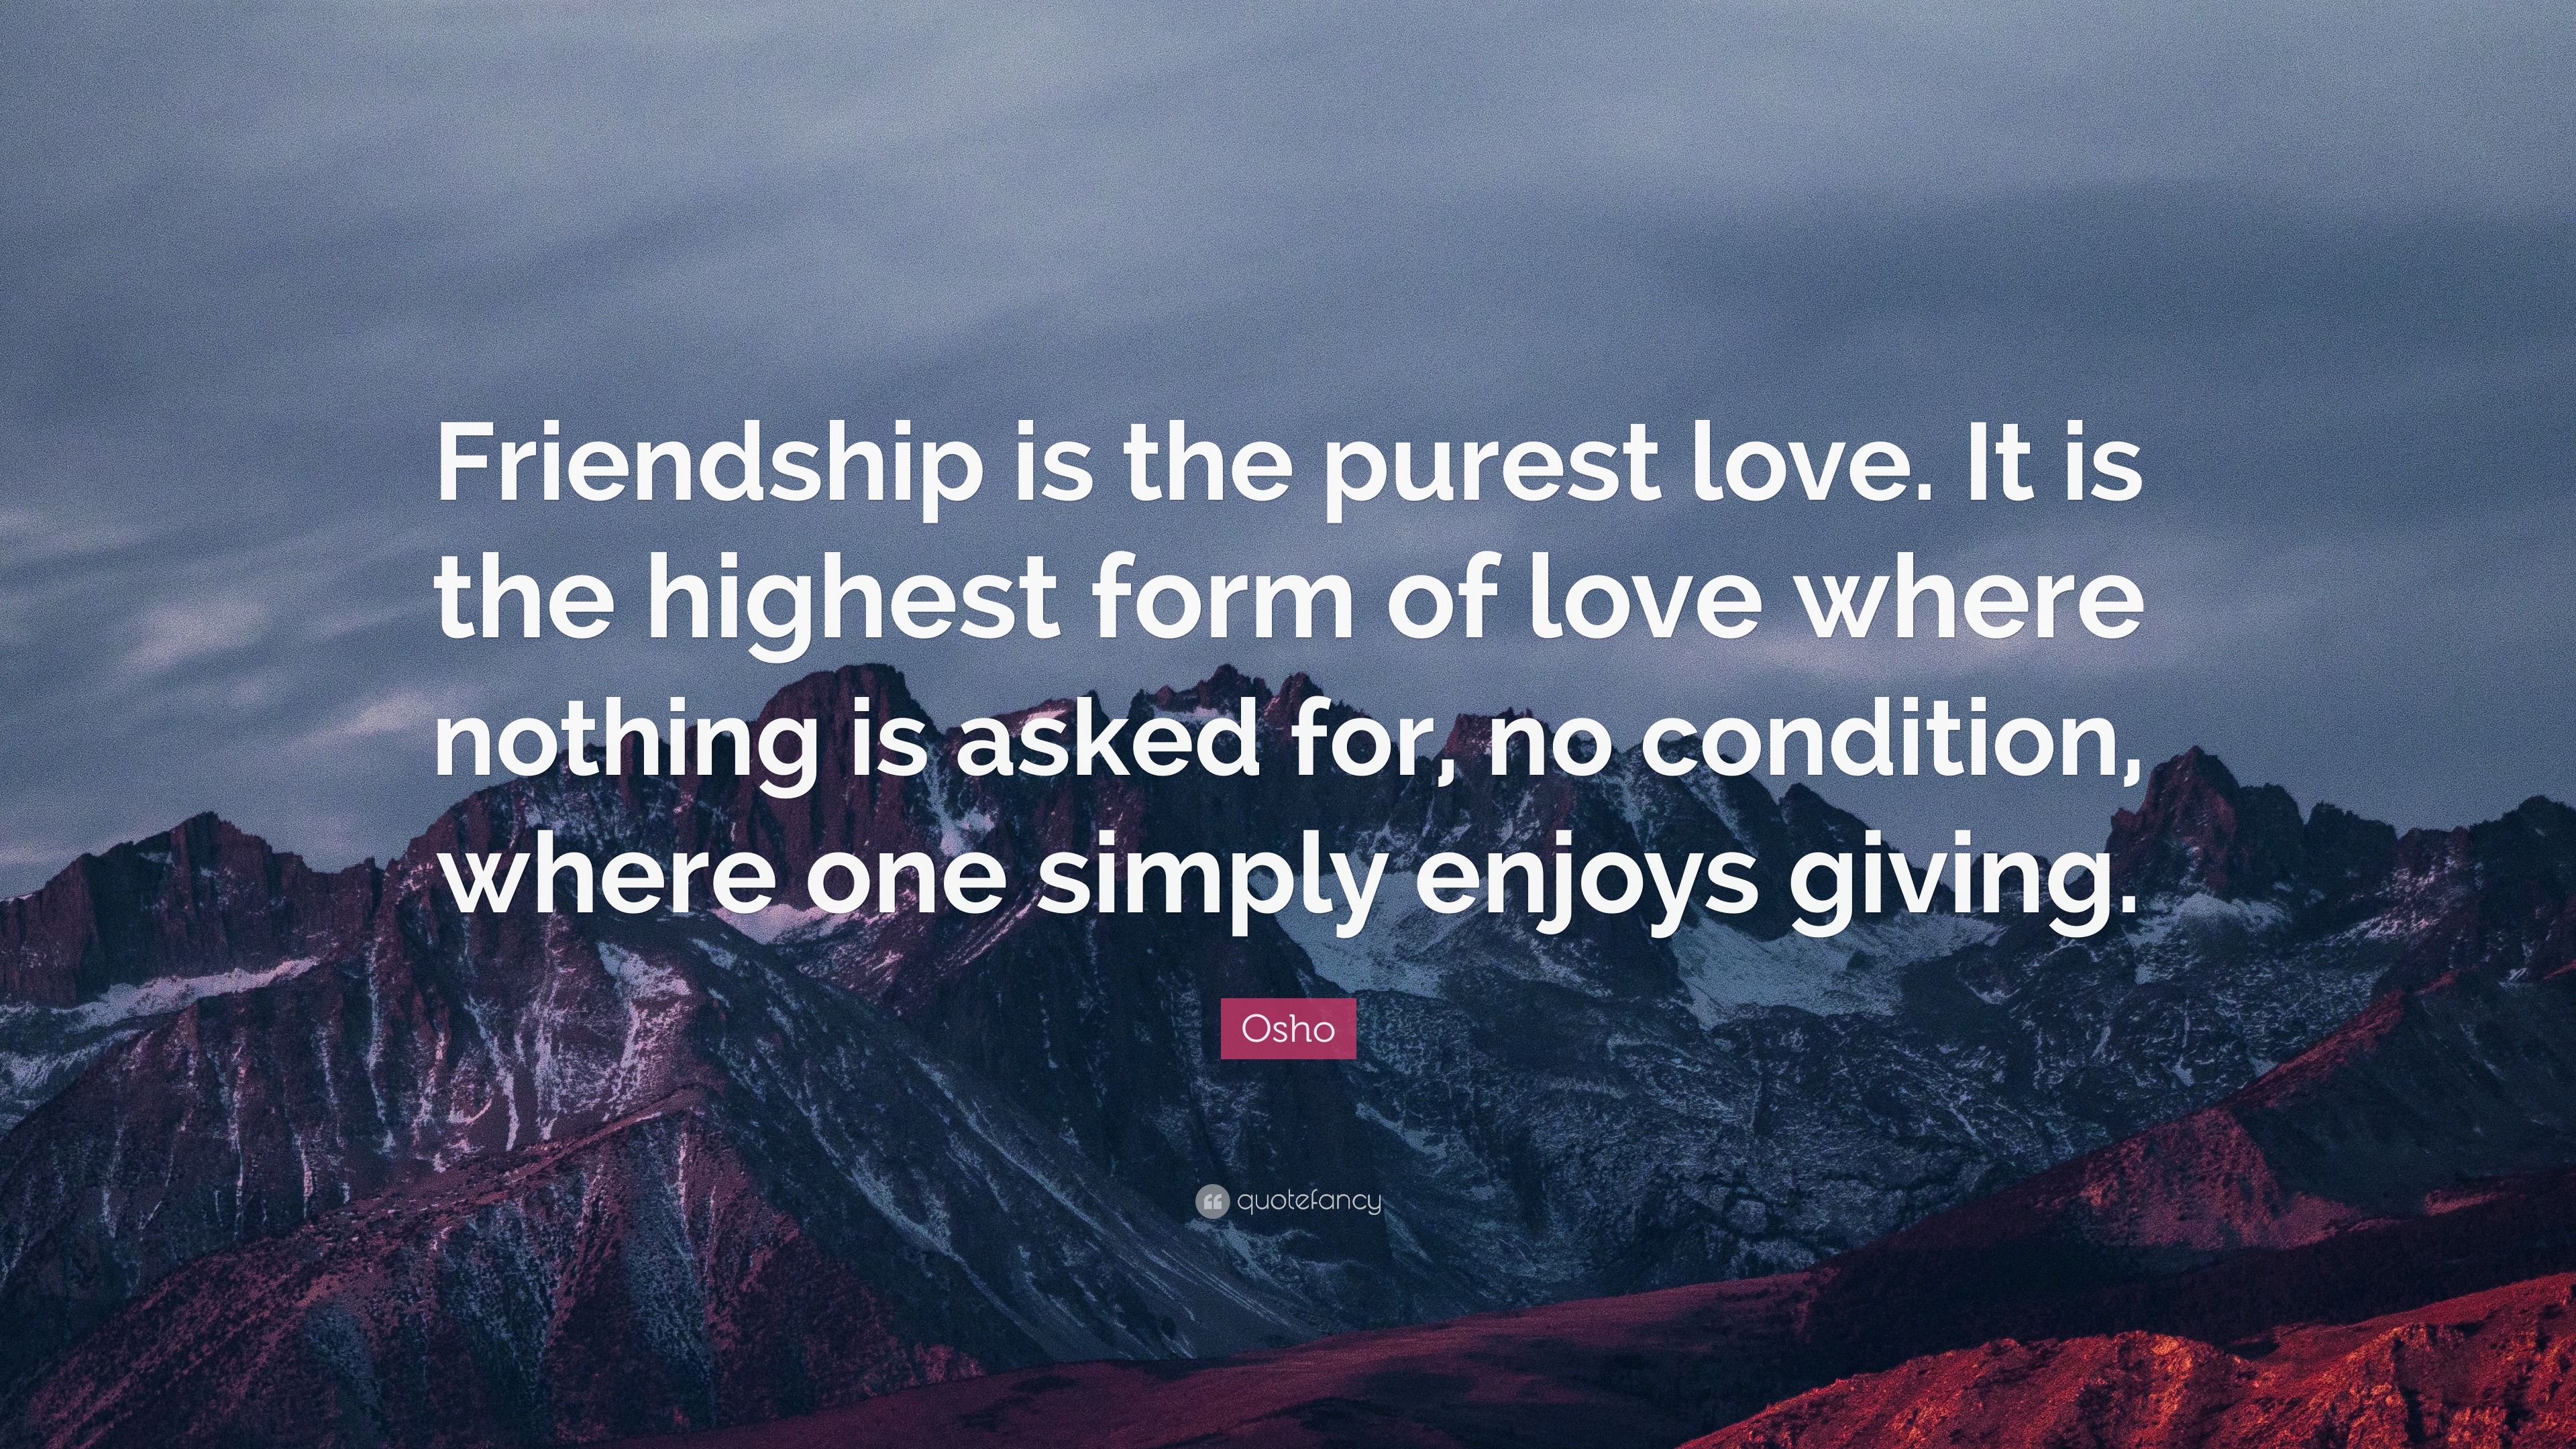 Osho quote friendship is the purest love it